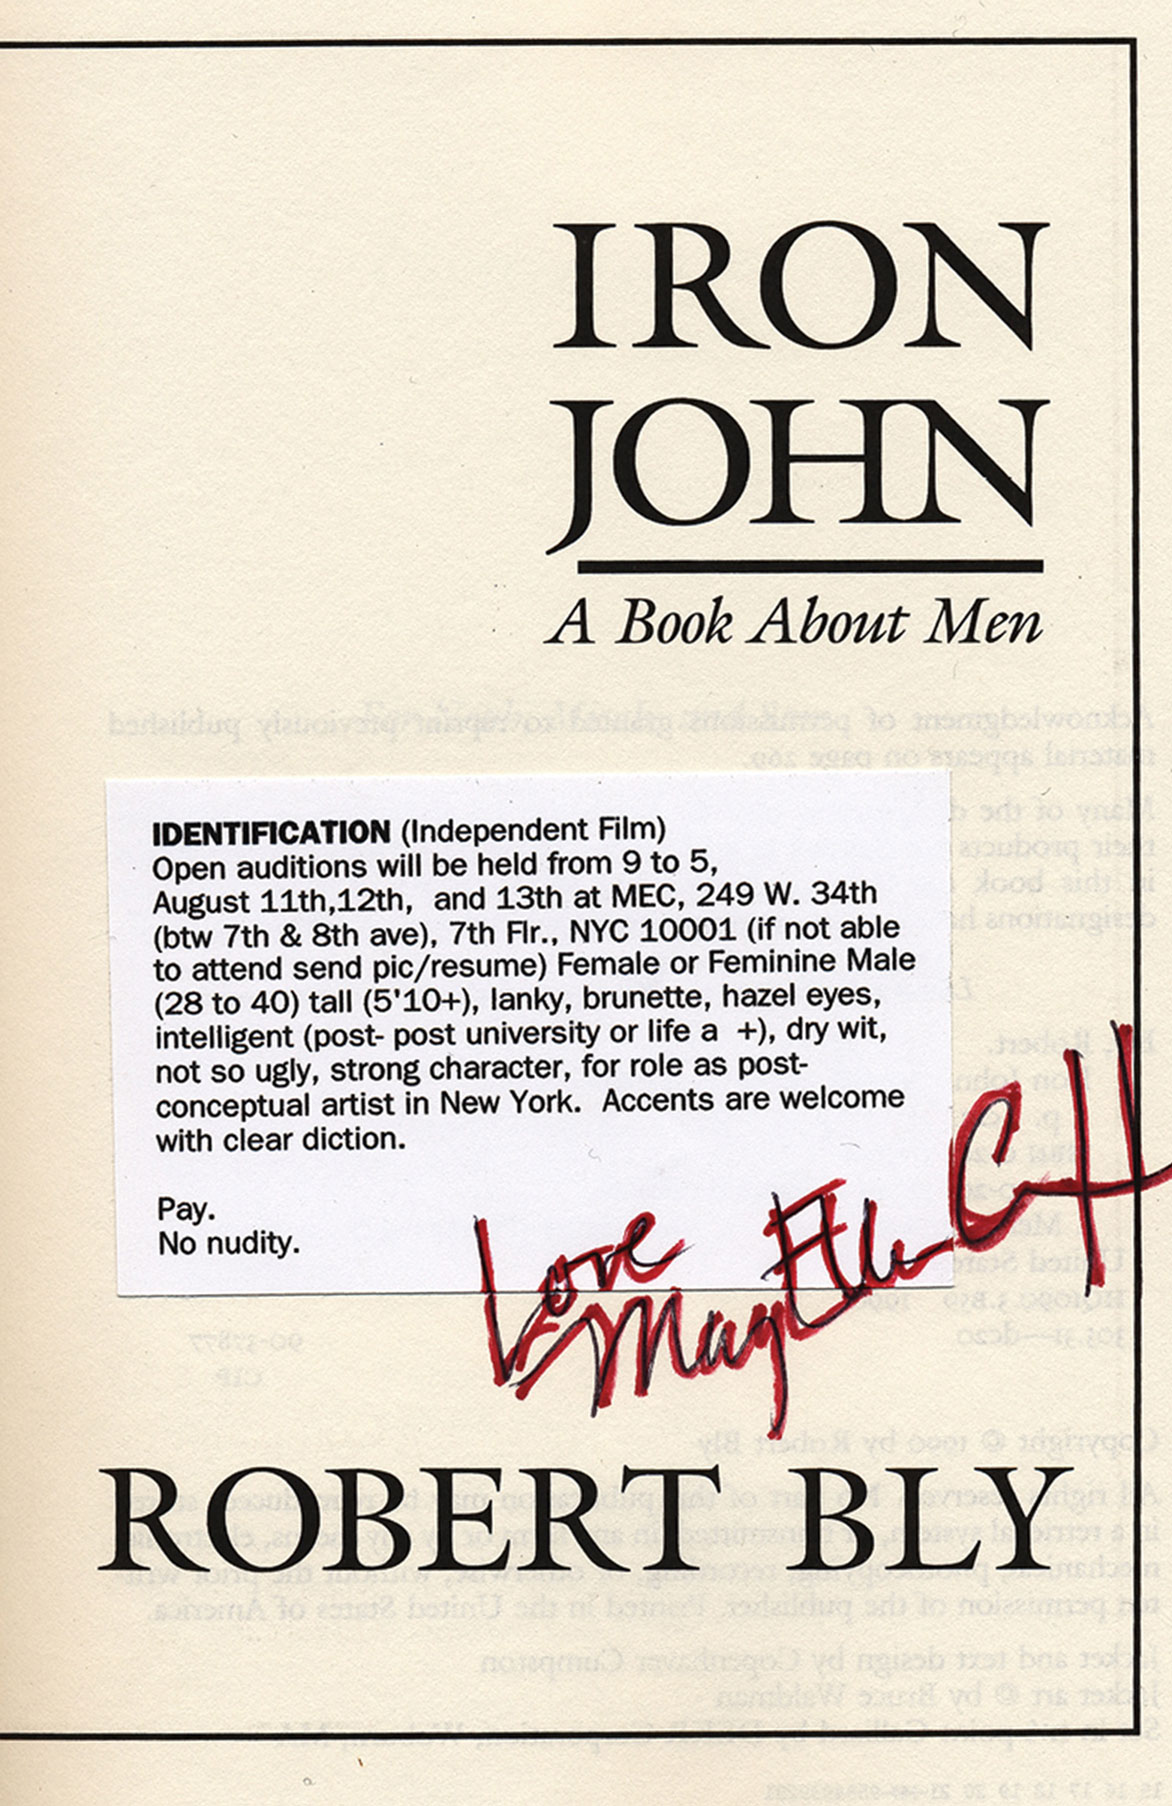 Title page of the book Iron John signed by Mary Ellen Carroll, with an open call for an independent film tucked inside.